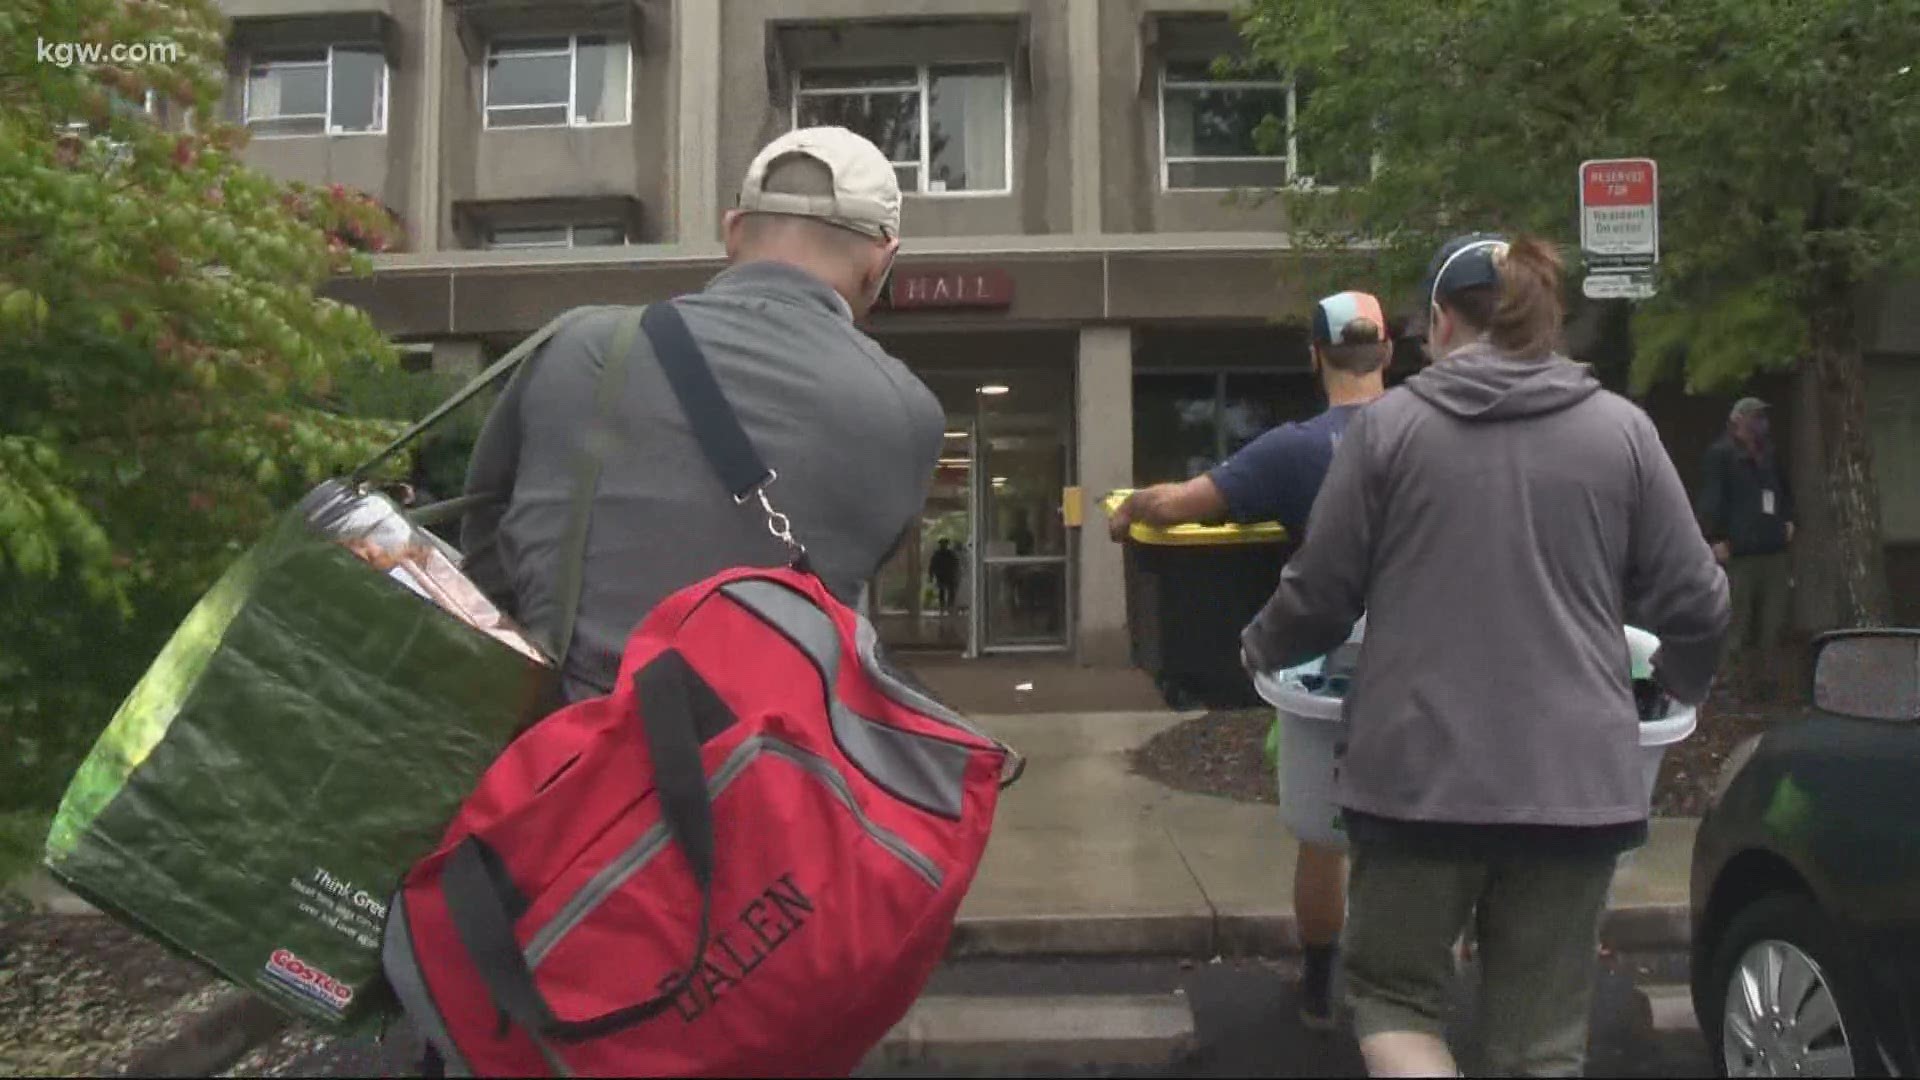 Oregon State requiring students to take COVID test before move in